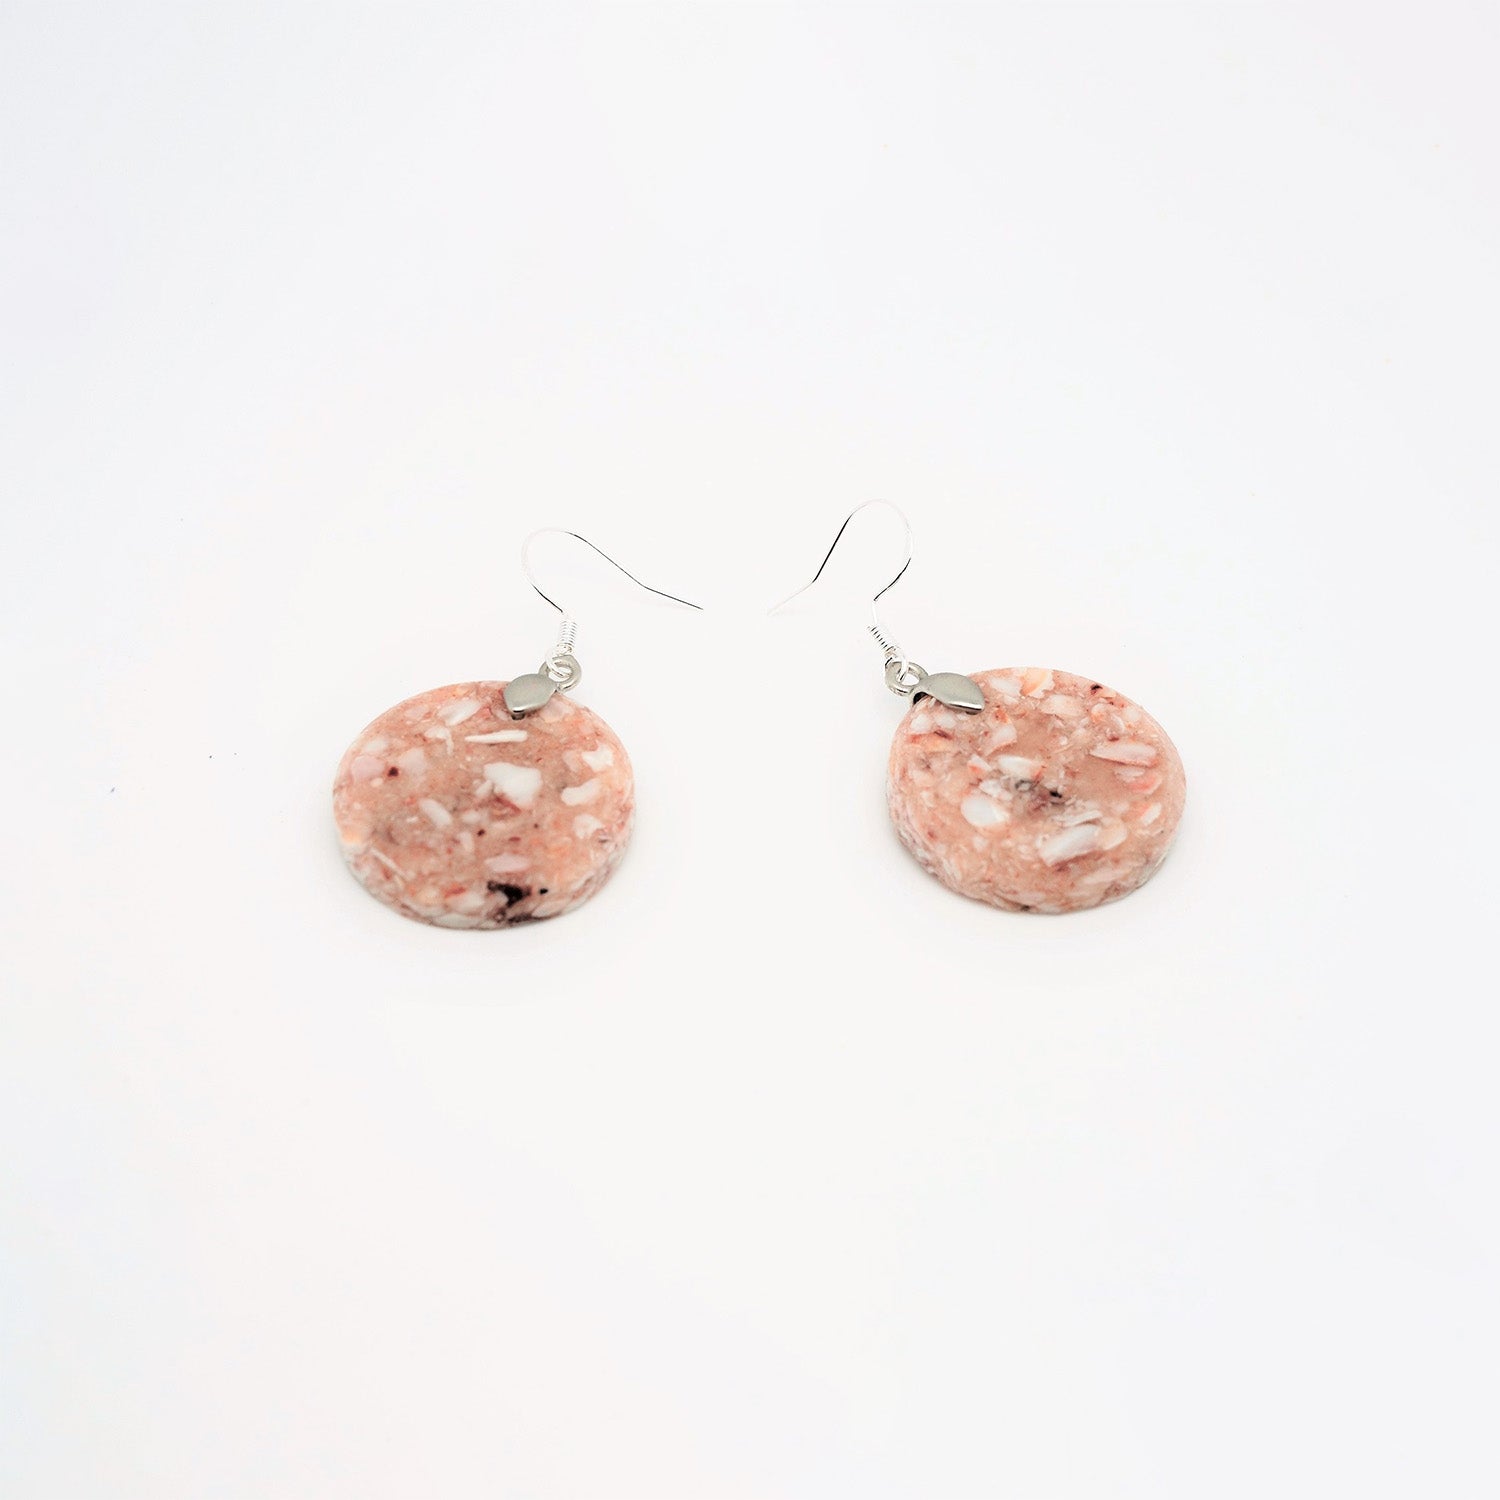 Round earrings made from recycled scallop shells